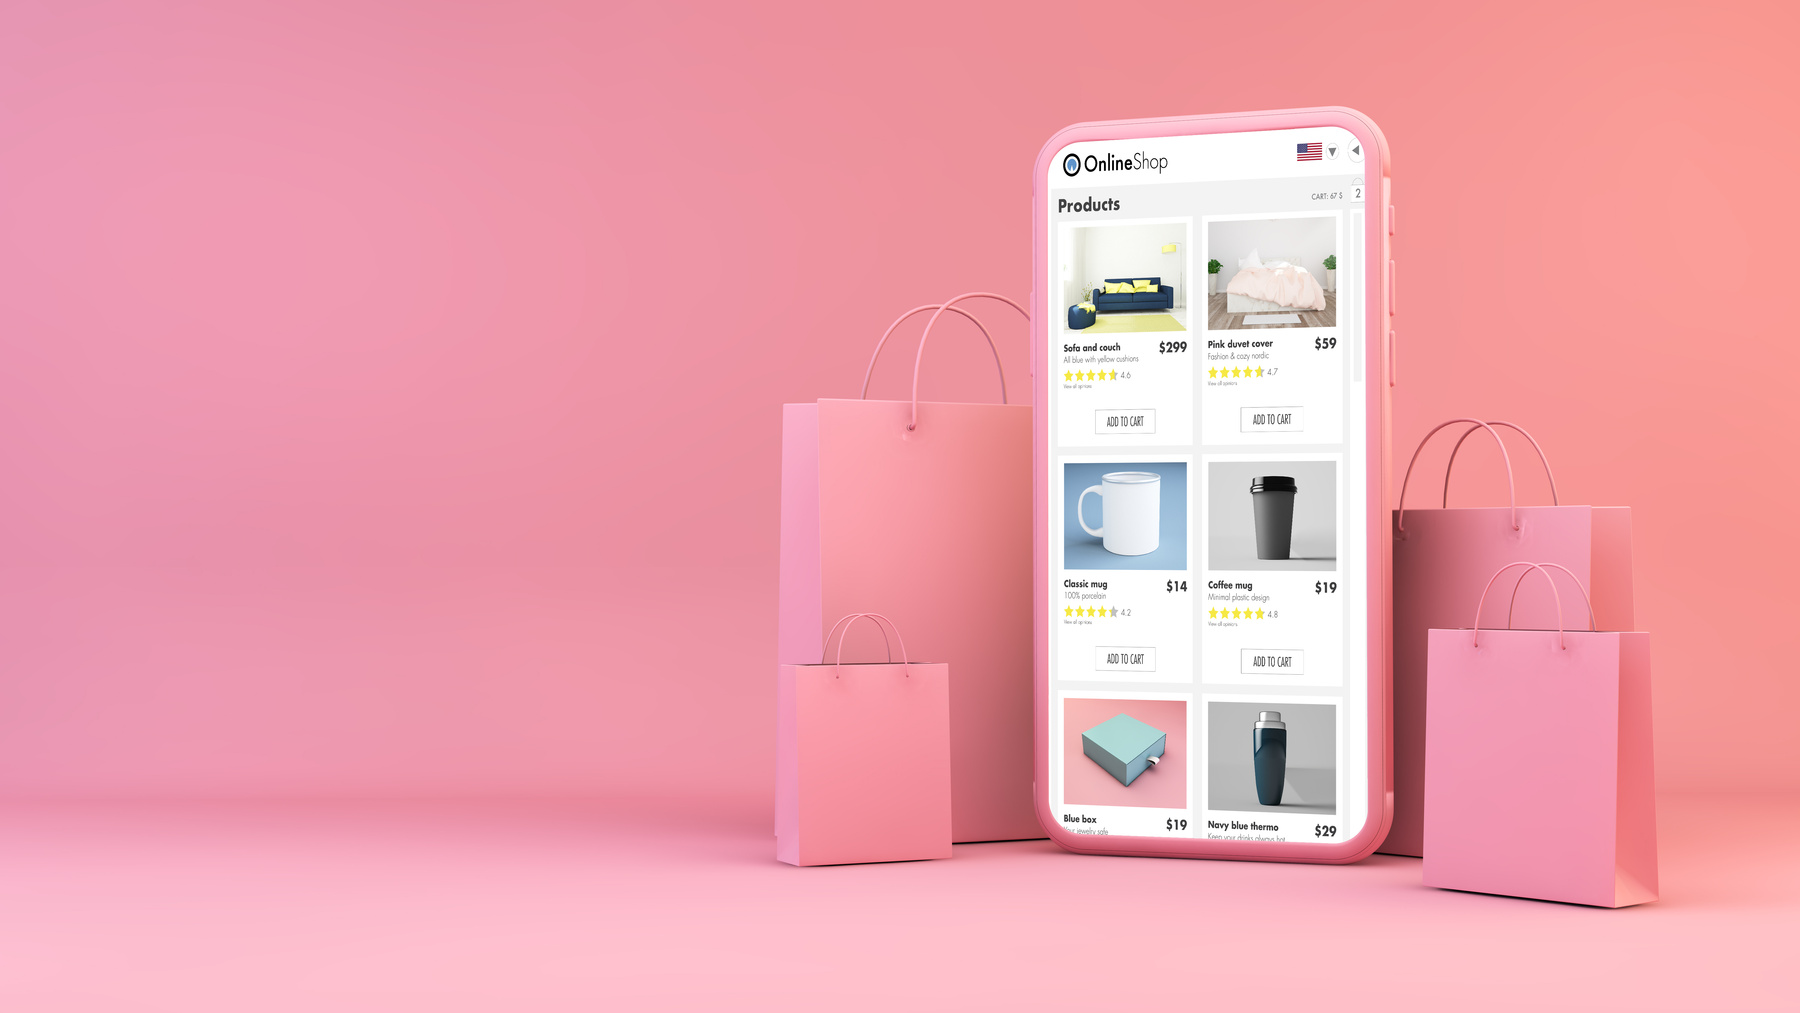 Online Shop on Mobile with Shopping Bags